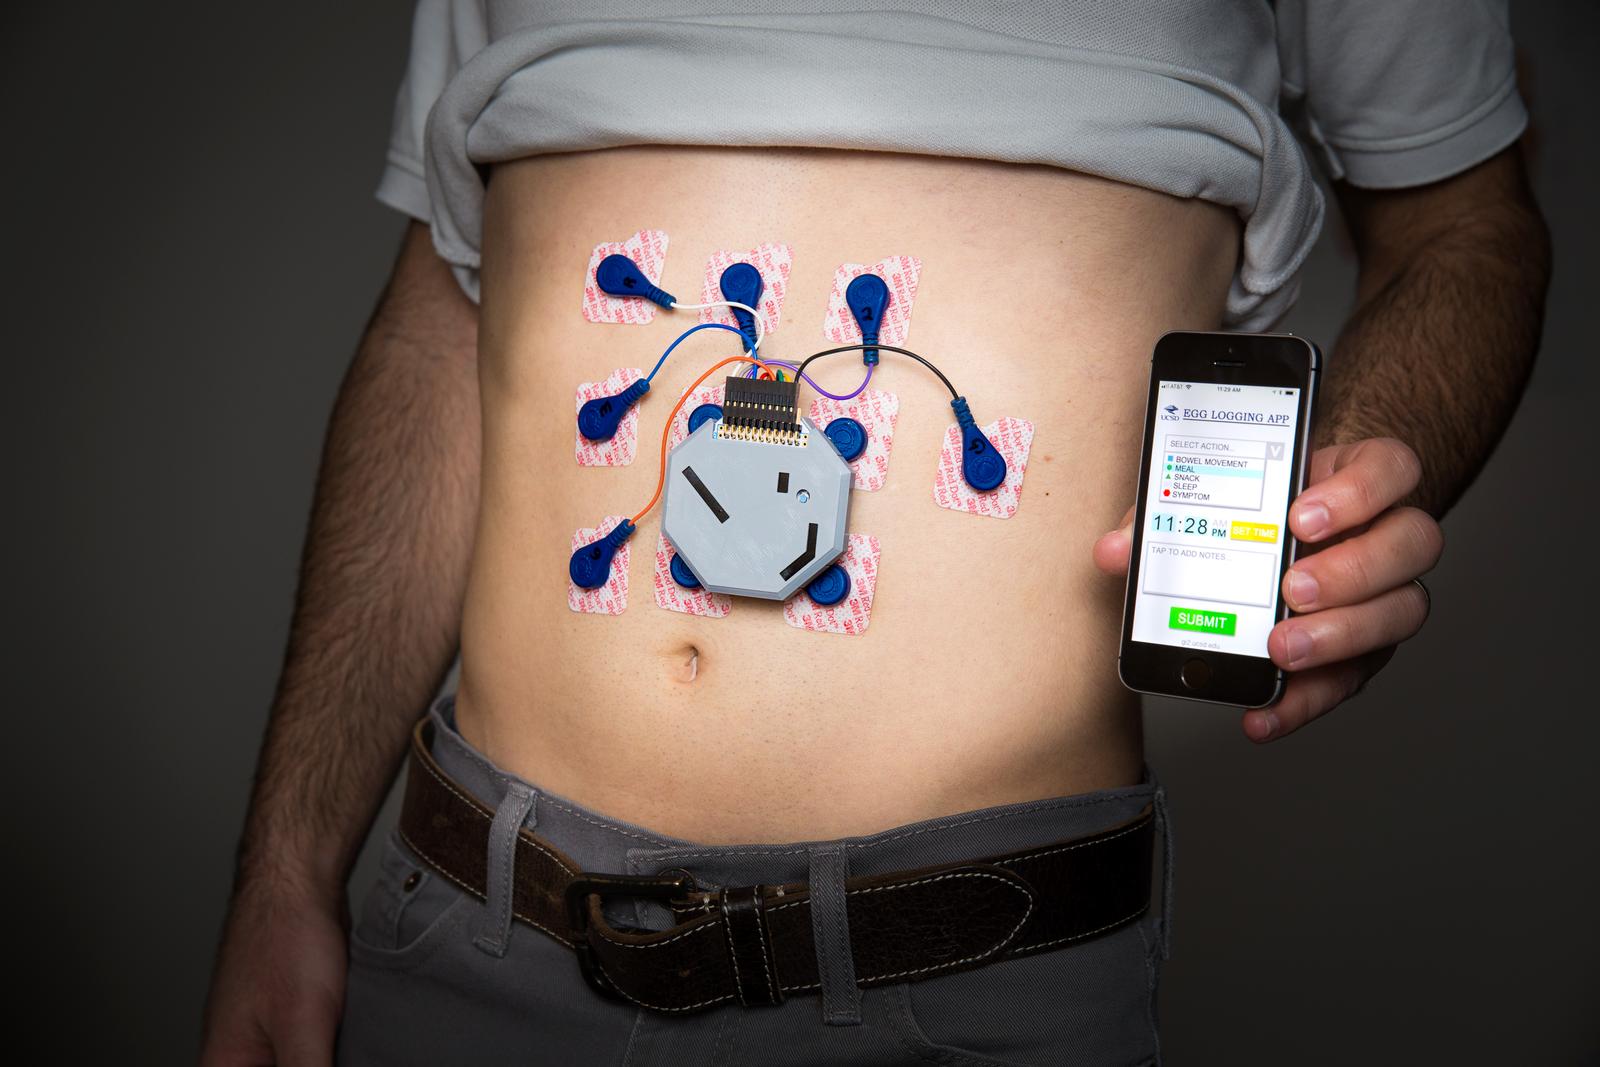 Researchers have 3D printed a wearable system to monitor stomach activity, that can be used outside of a clinical environment. Photo via UCSD.